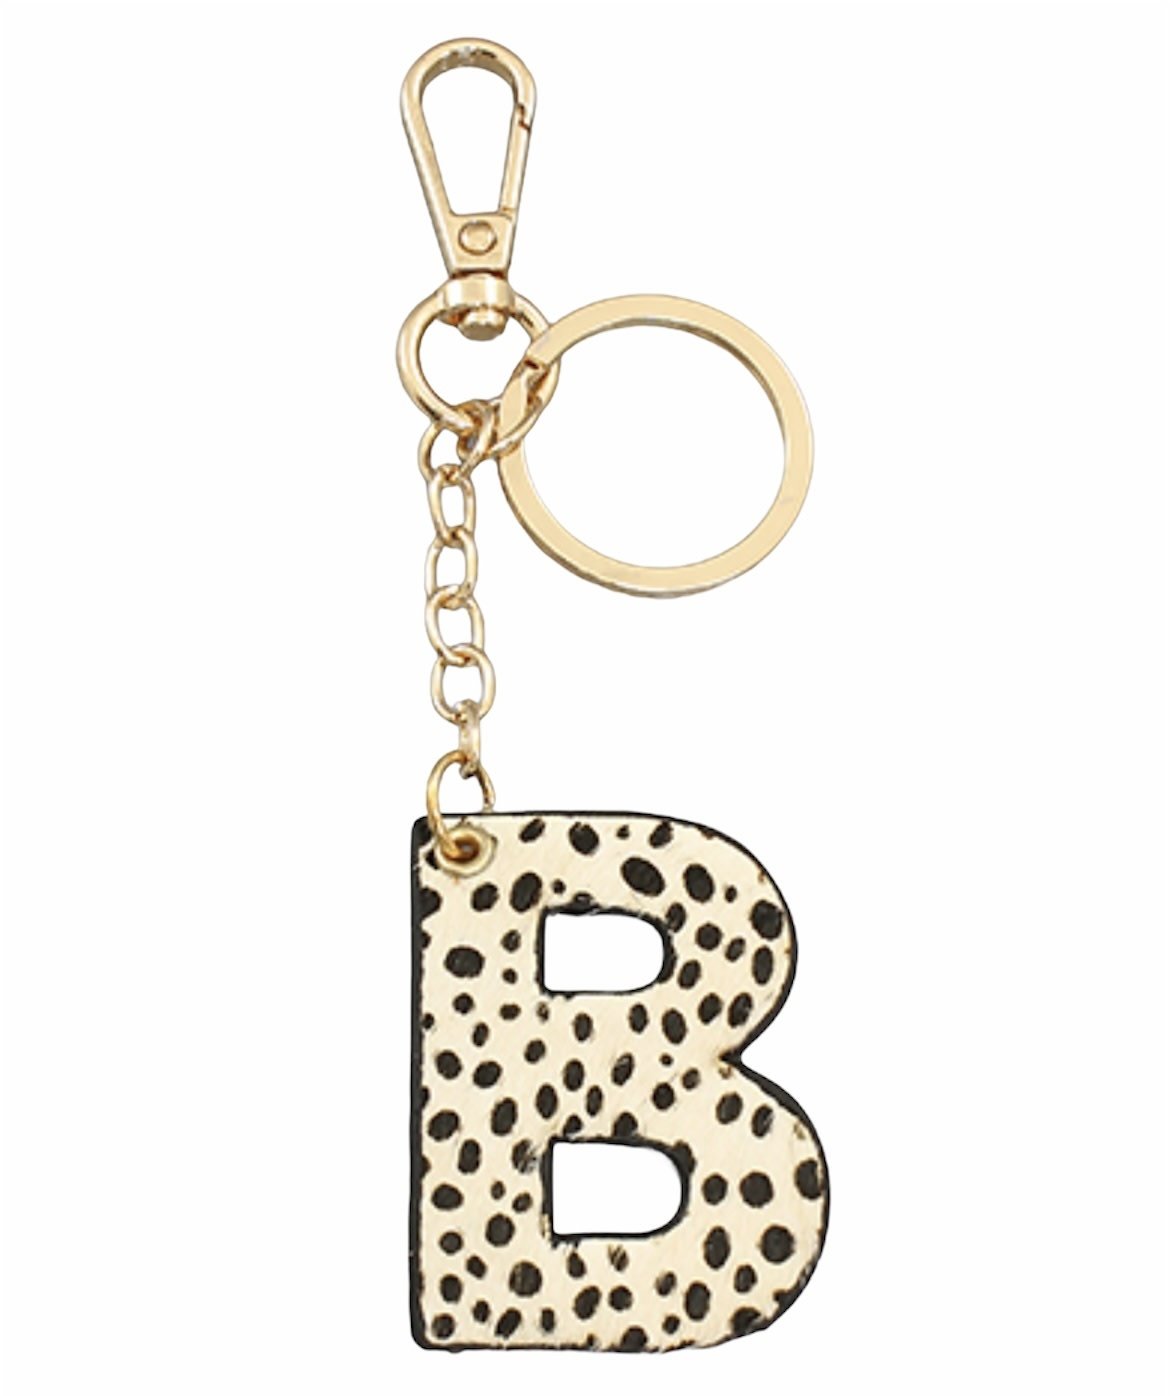 Junyuerly Letter Key Chains Accessories for Women and Girls, Gold Initial Key Ring Acetate Leopard Print Pendant for Car Keys